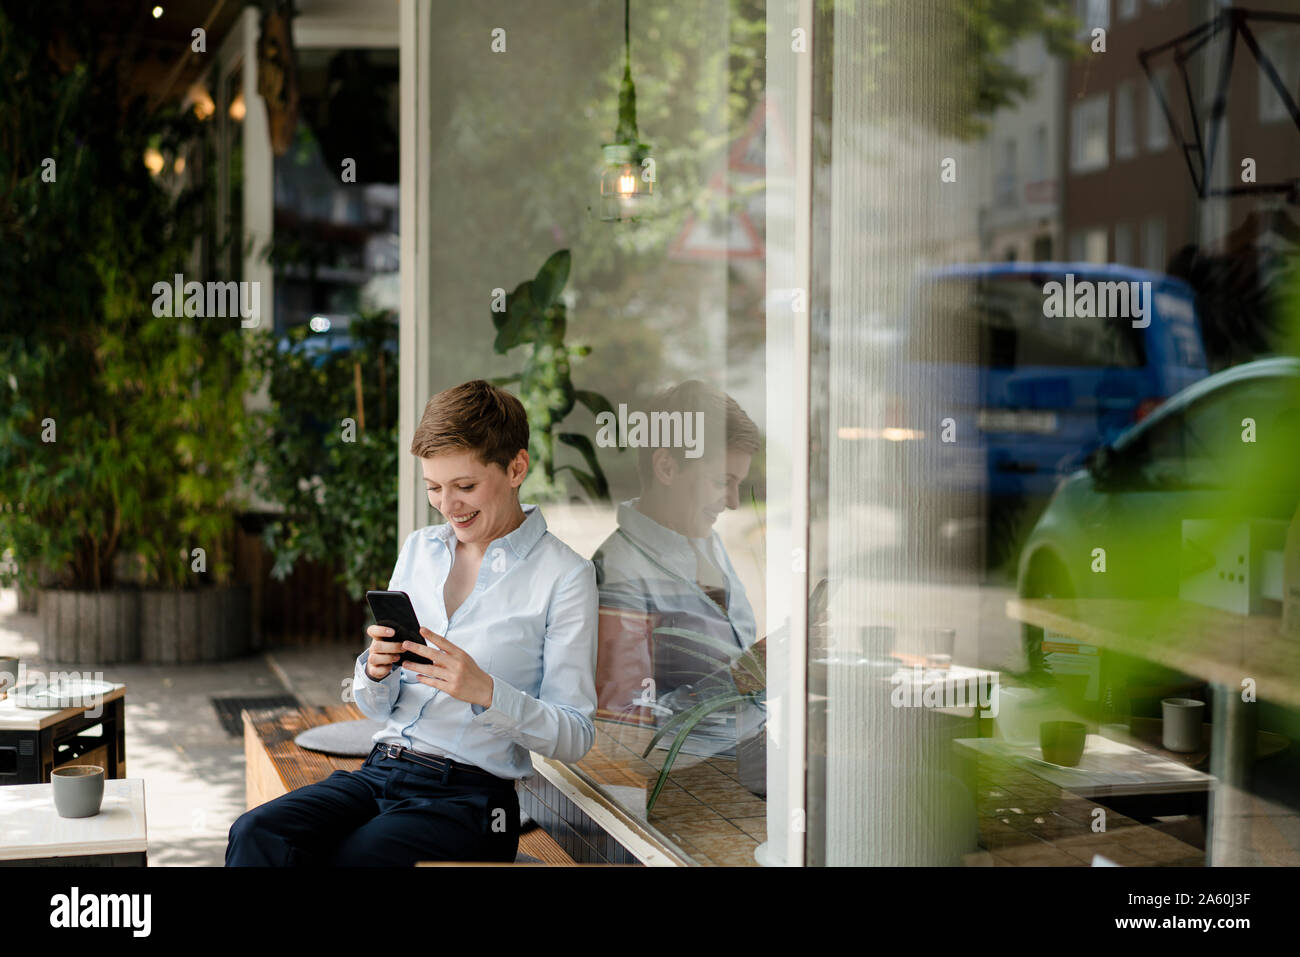 Businesswoman using cell phone at a cafe Banque D'Images